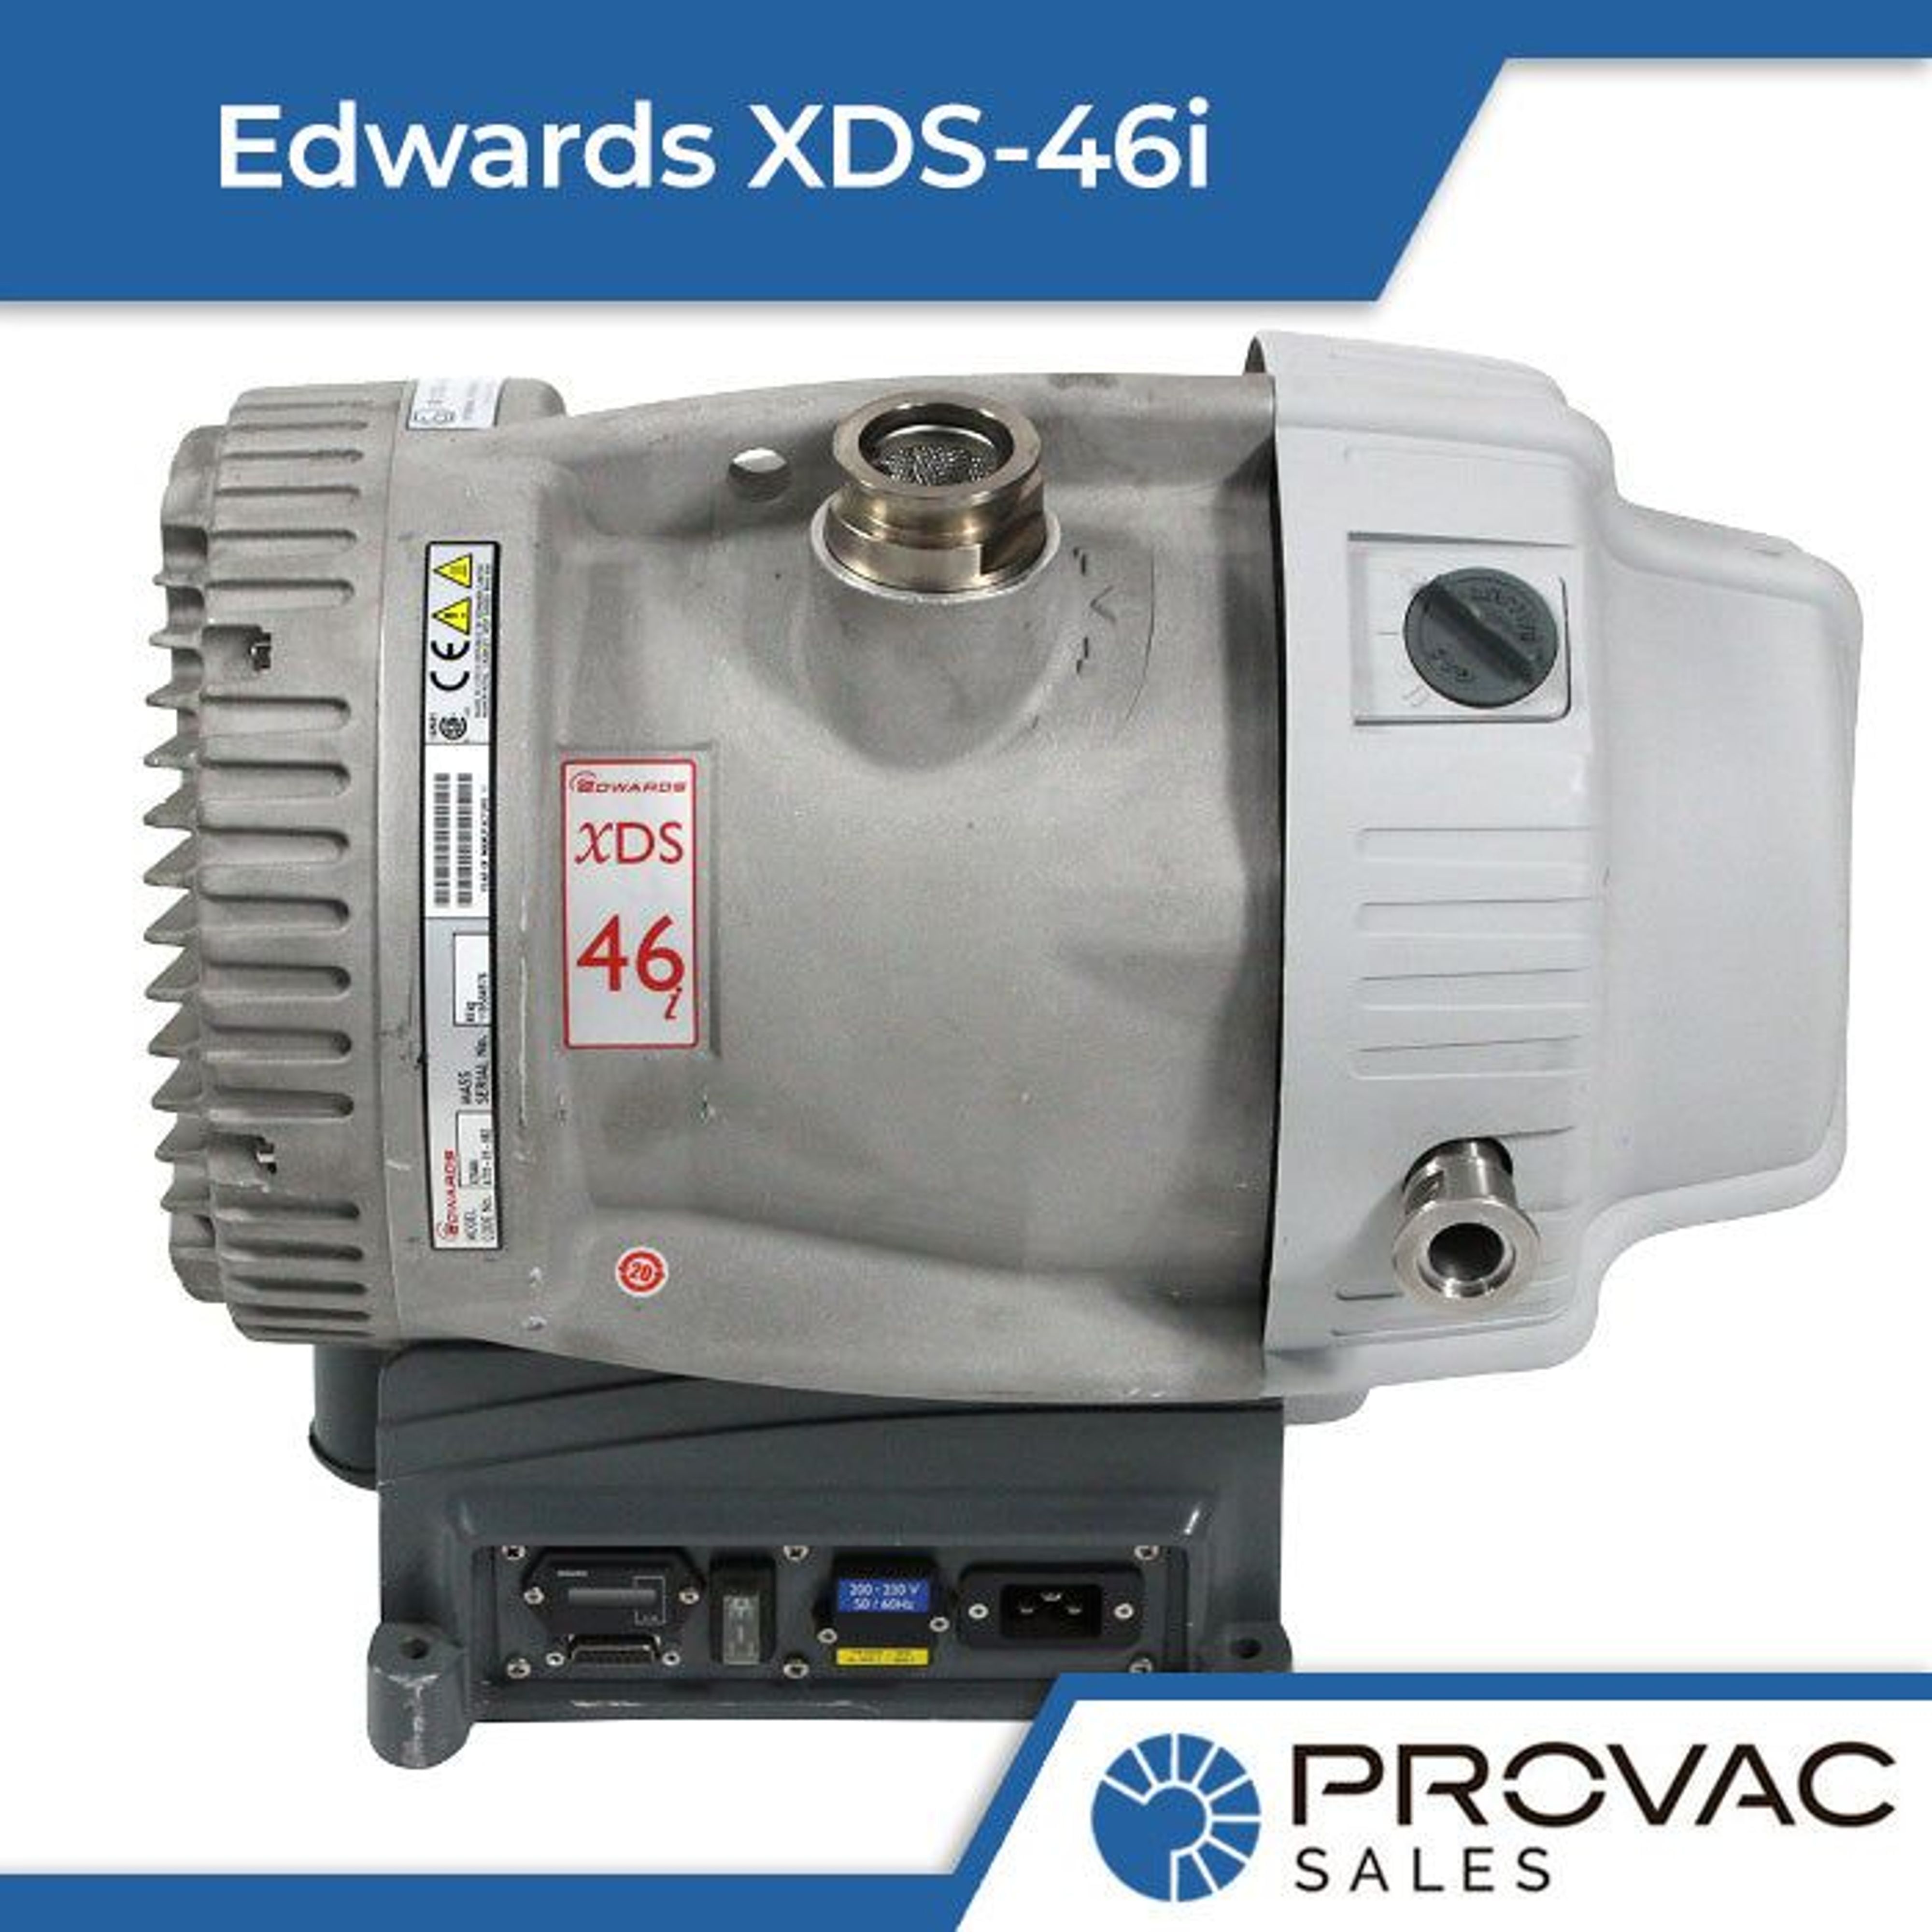 Edwards XDS-46i Scroll Pump: In Stock, Ready to Ship Background